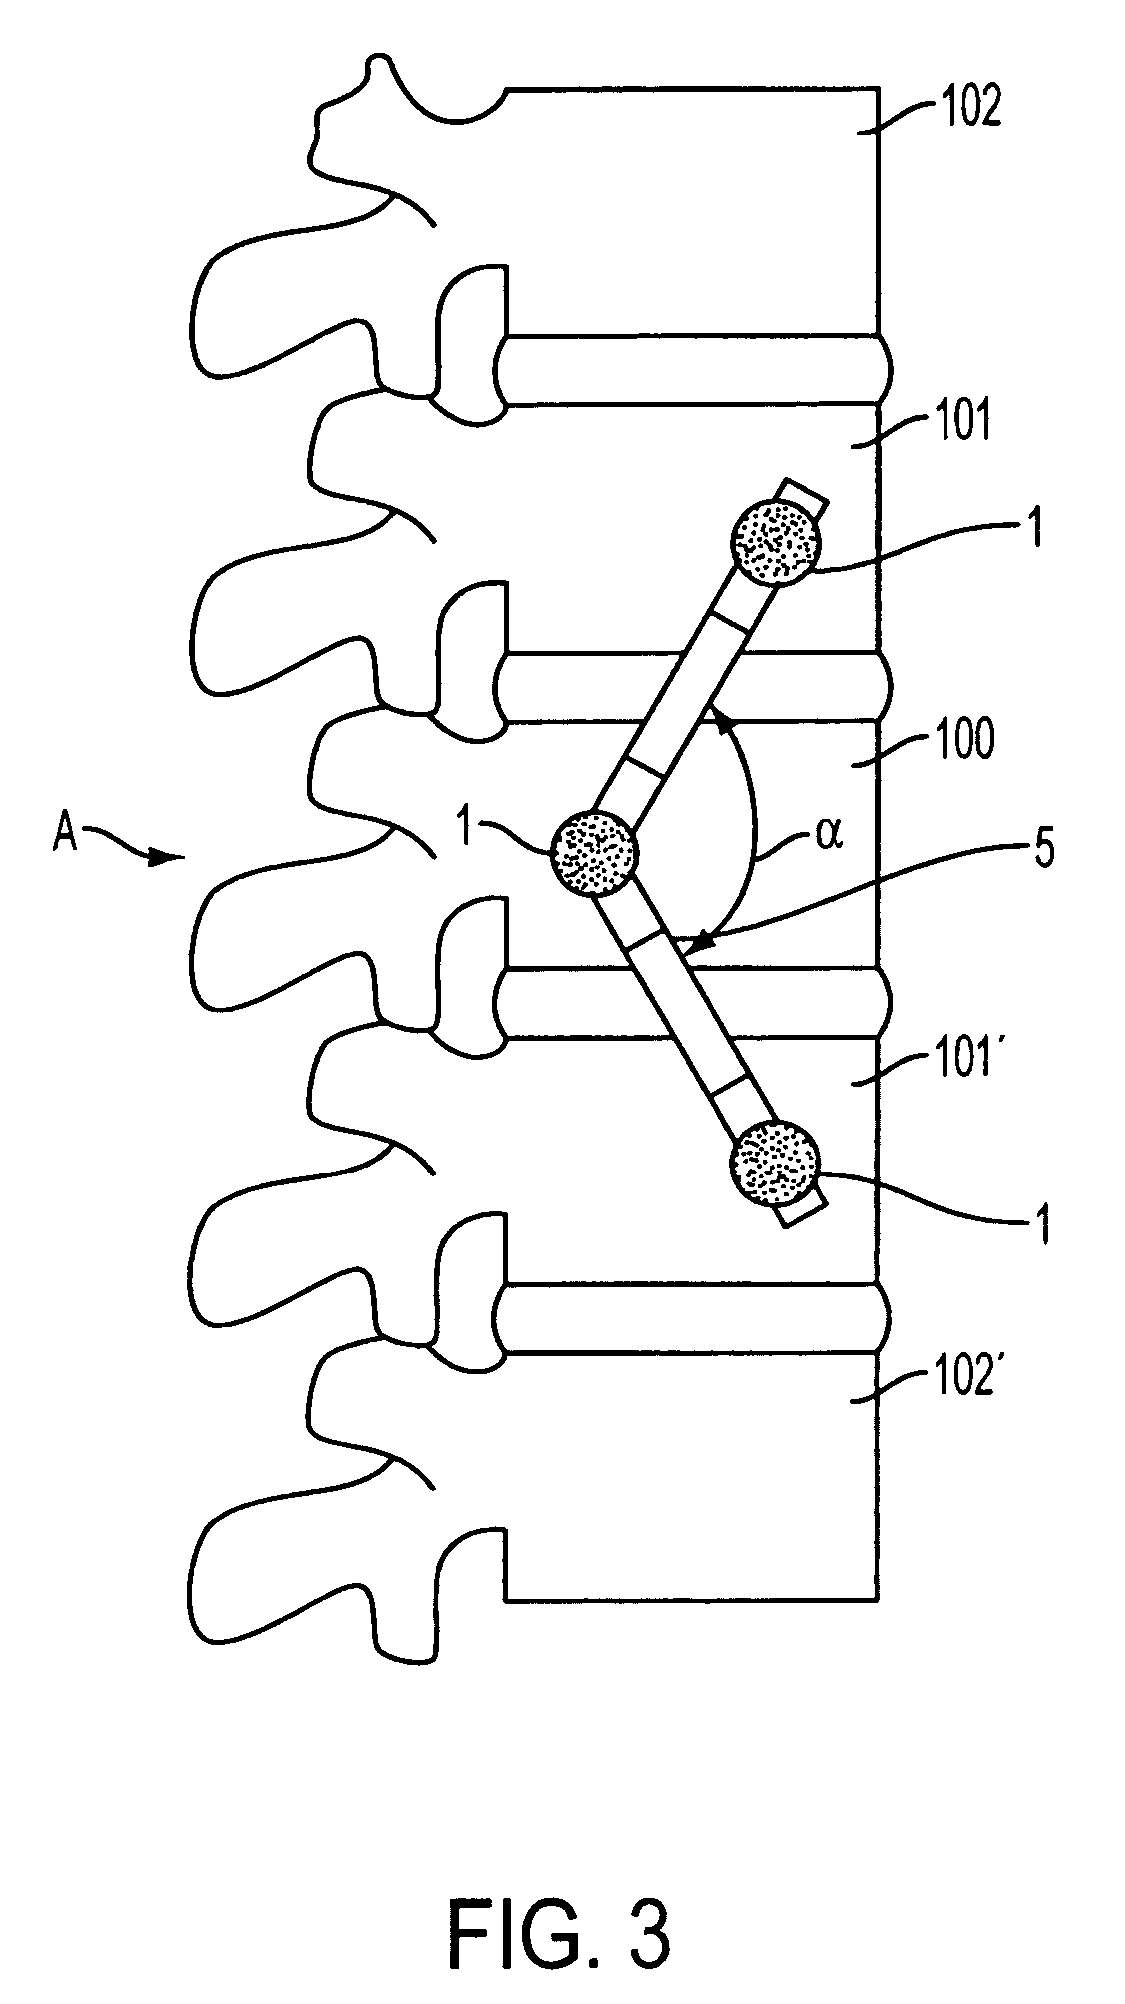 Device for dynamic spinal fixation for correction of spinal deformities